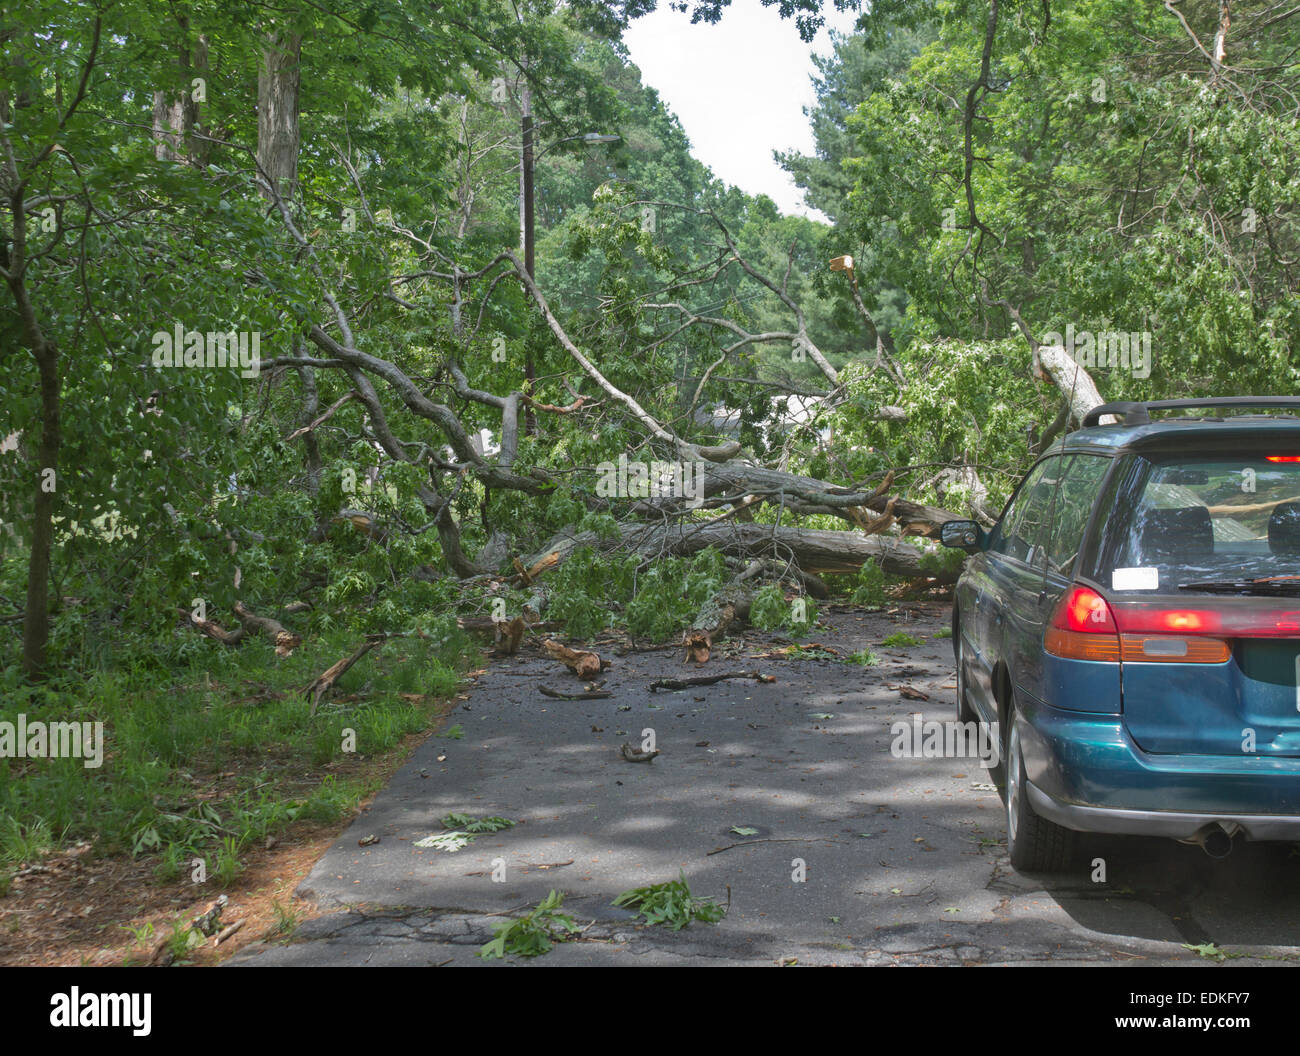 A large oak tree lies crumpled with its branches completely blocking a road stopping a car Stock Photo